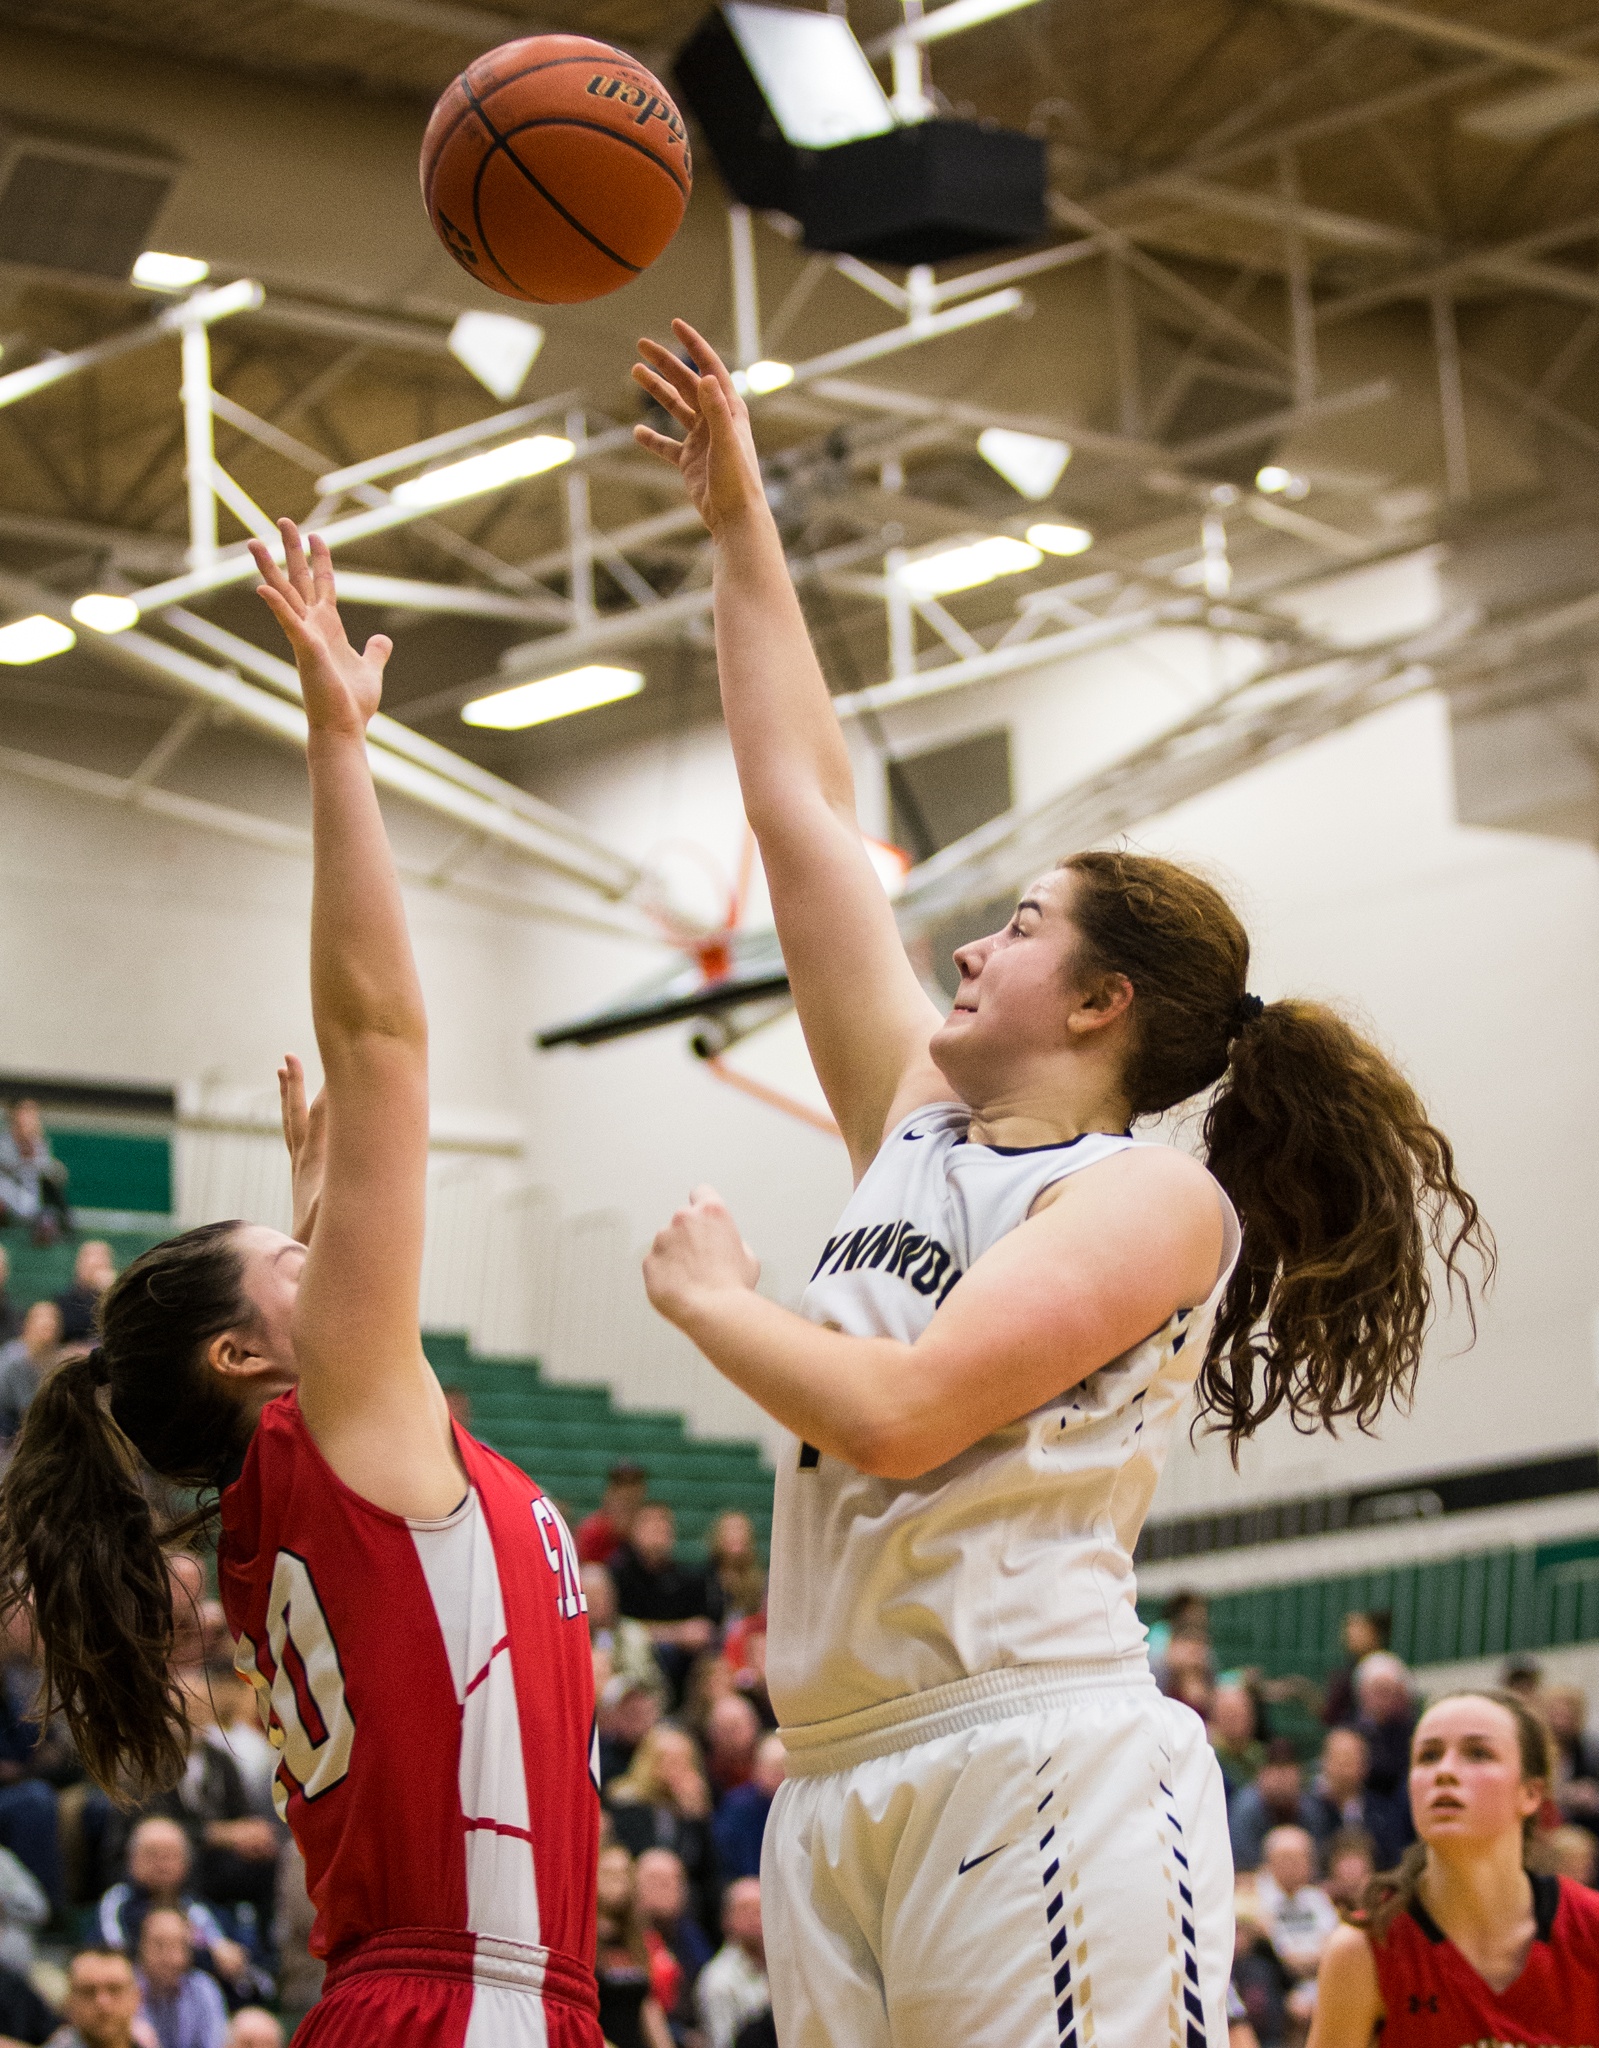 Lynnwood’s Kelsey Rogers shoots the ball over a Snohomish defender during the championship game of the 3A District 1 girls basketball tournament Feb. 17, 2017, at Jackson High School in Mill Creek. Lynnwood beat Snohomish 55-53. (Daniella Beccaria / The Herald)